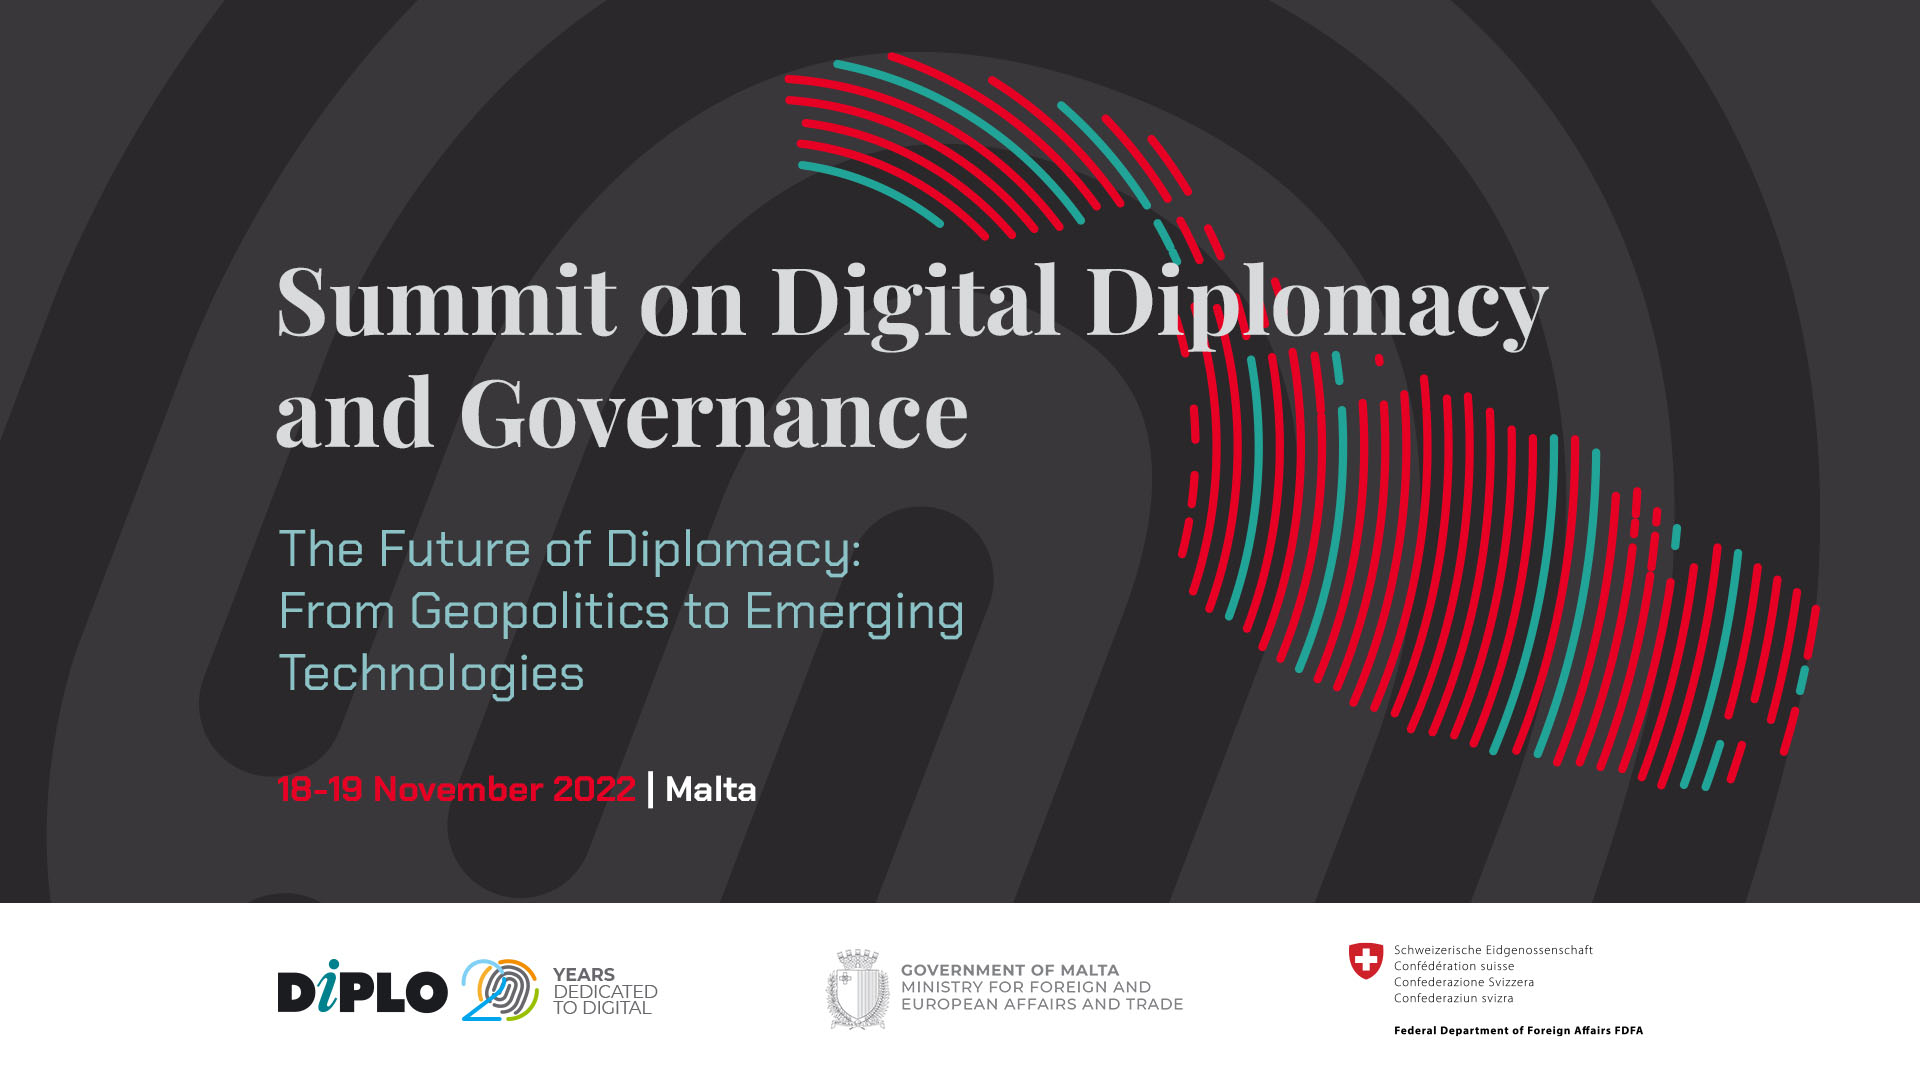 IV. Benefits of Digital Diplomacy in Facilitating Communication and Cooperation